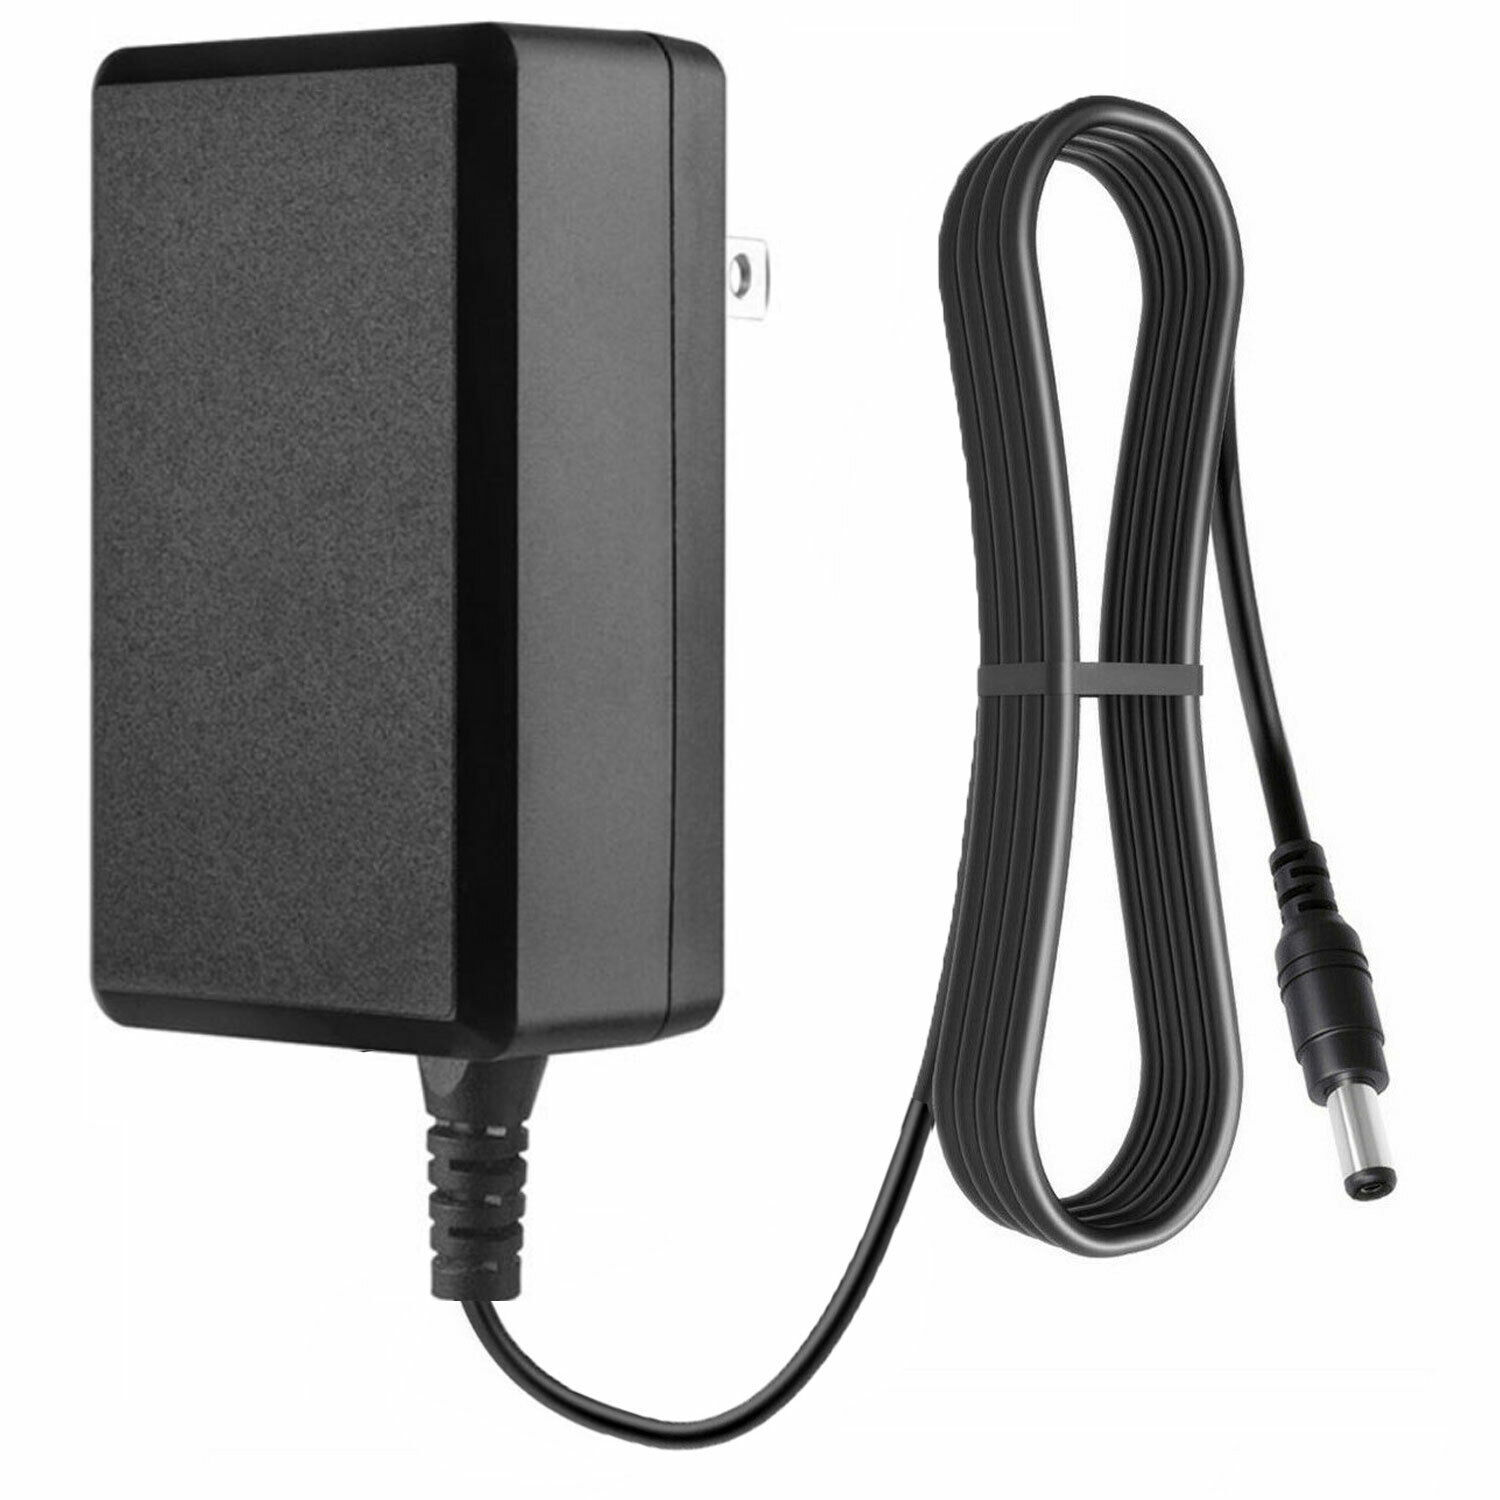 NEW 9V AC/AC Adapter For ART Tube MP Studio Mic Preamp ITE Power Supply Charger AC input voltage ……120VAC 2 Input freq